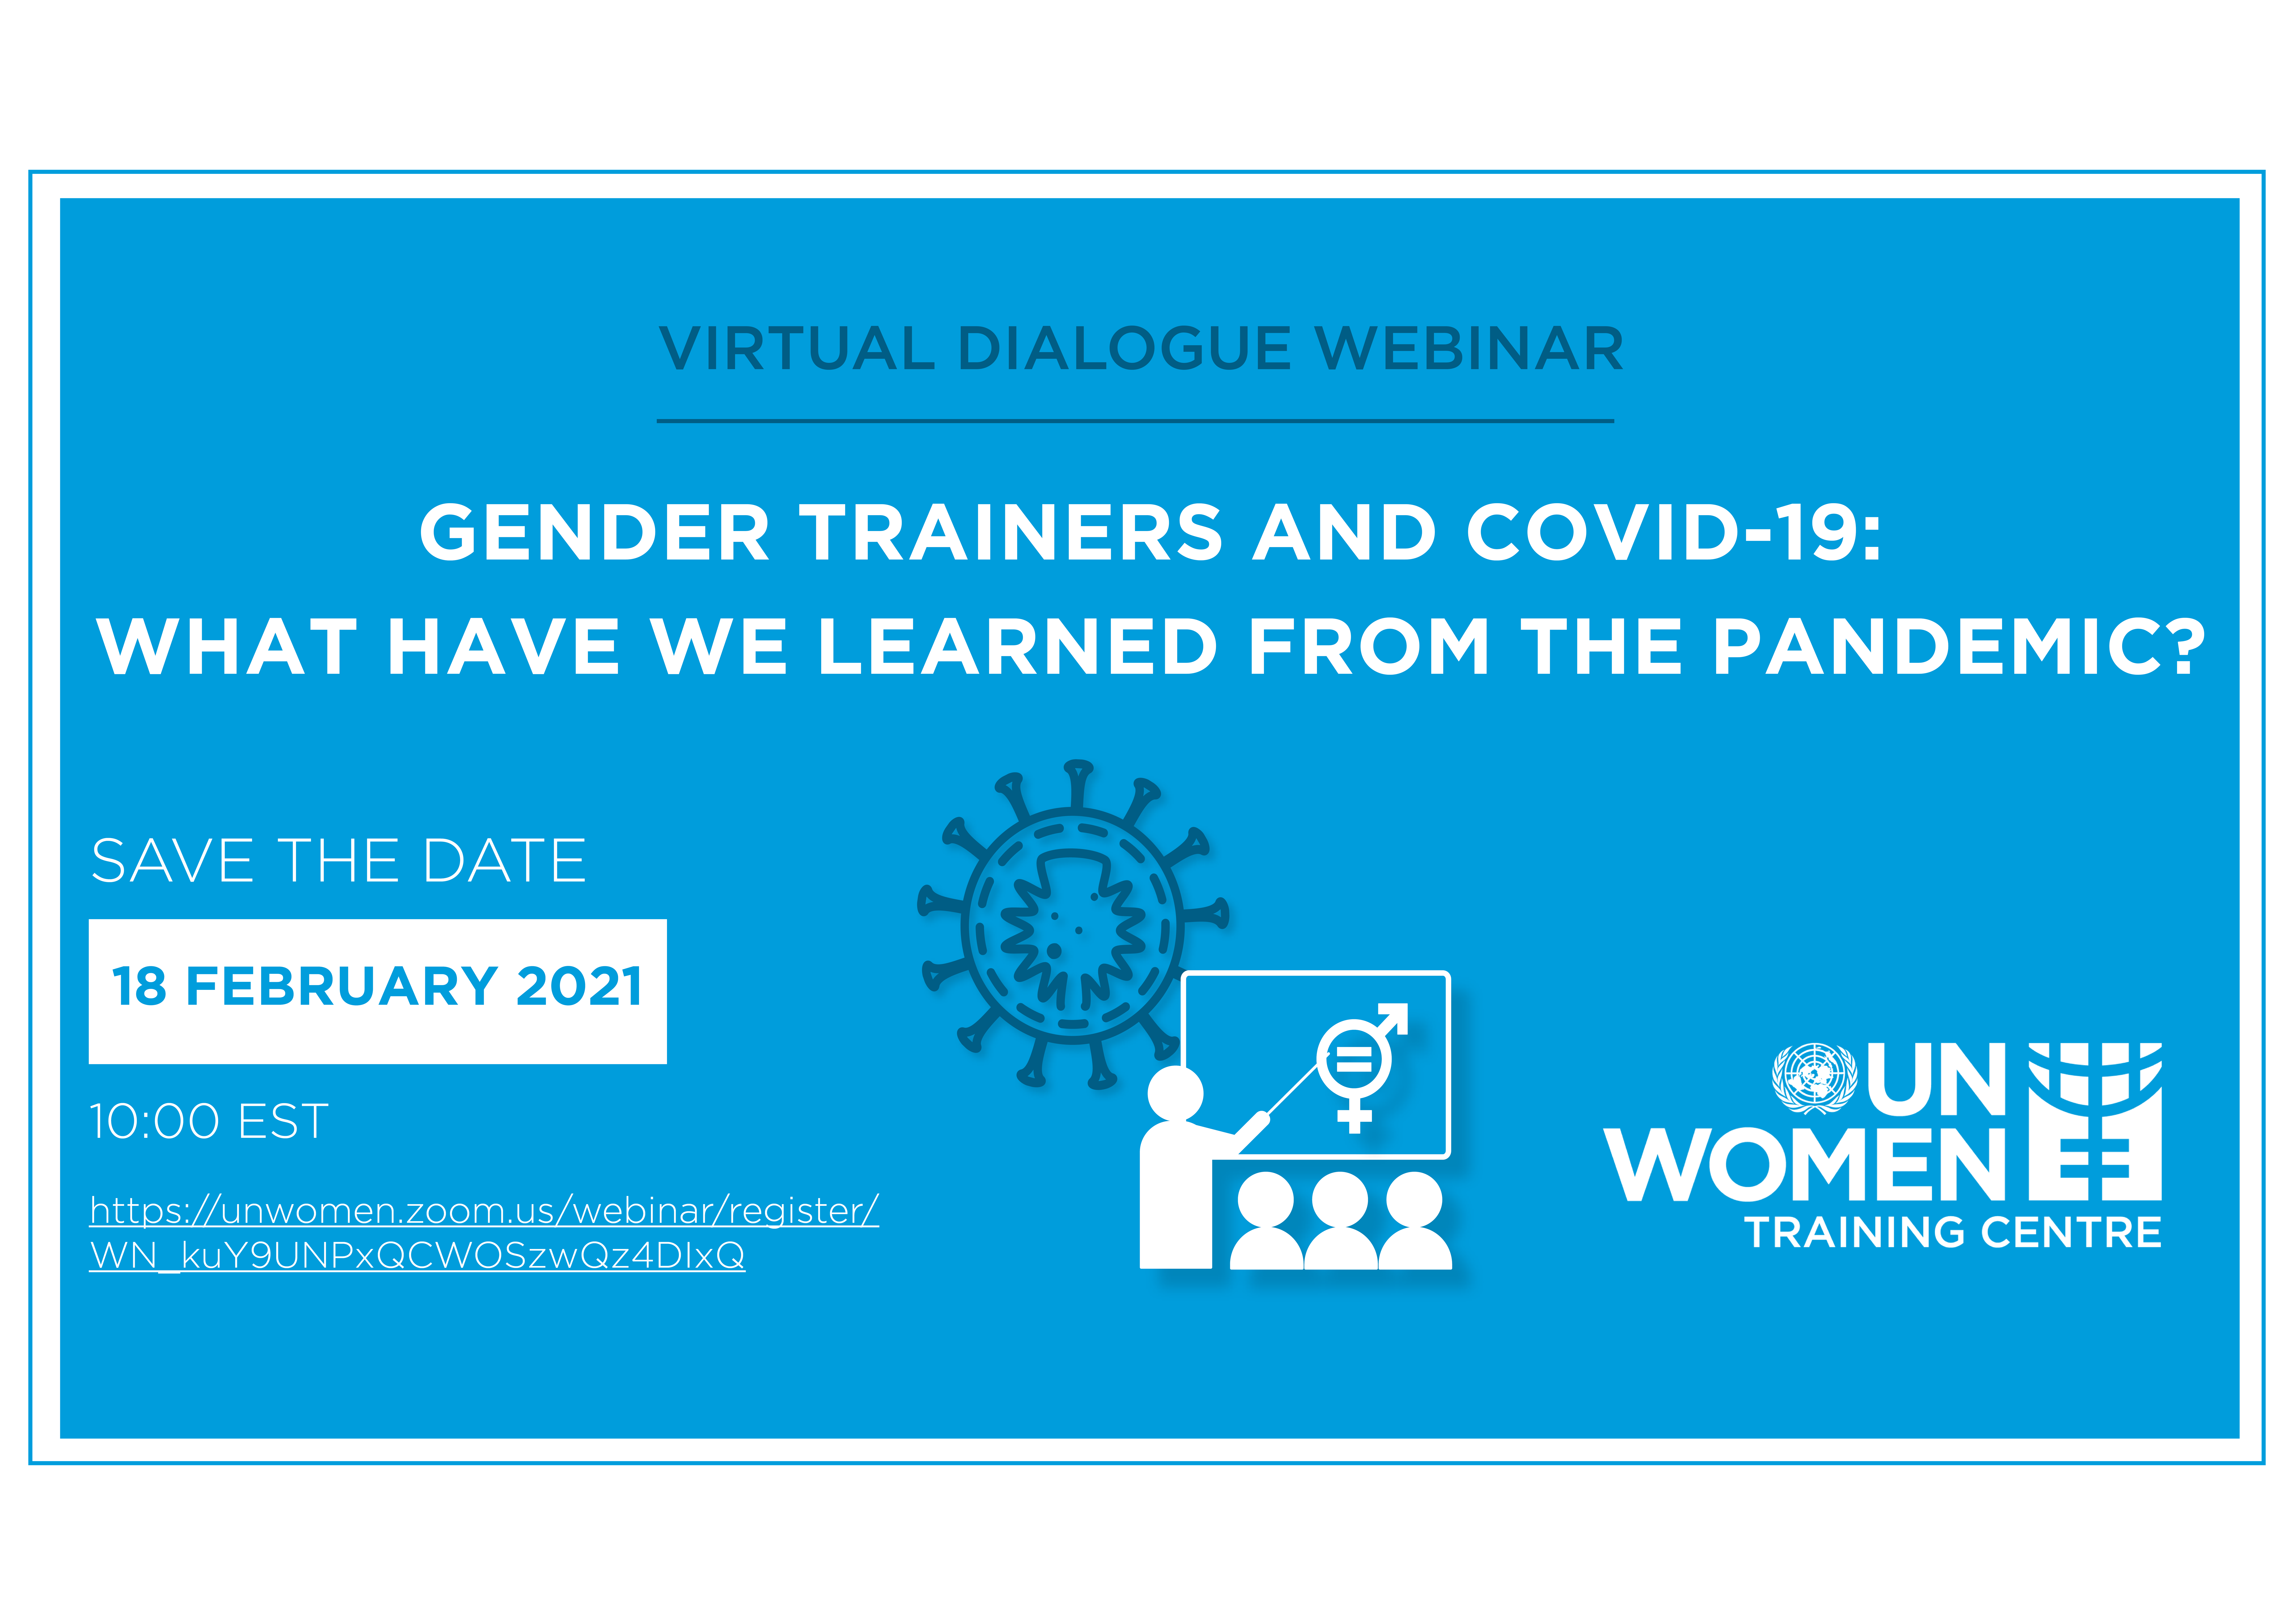 Virtual Dialogue gender trainers and COVID-19